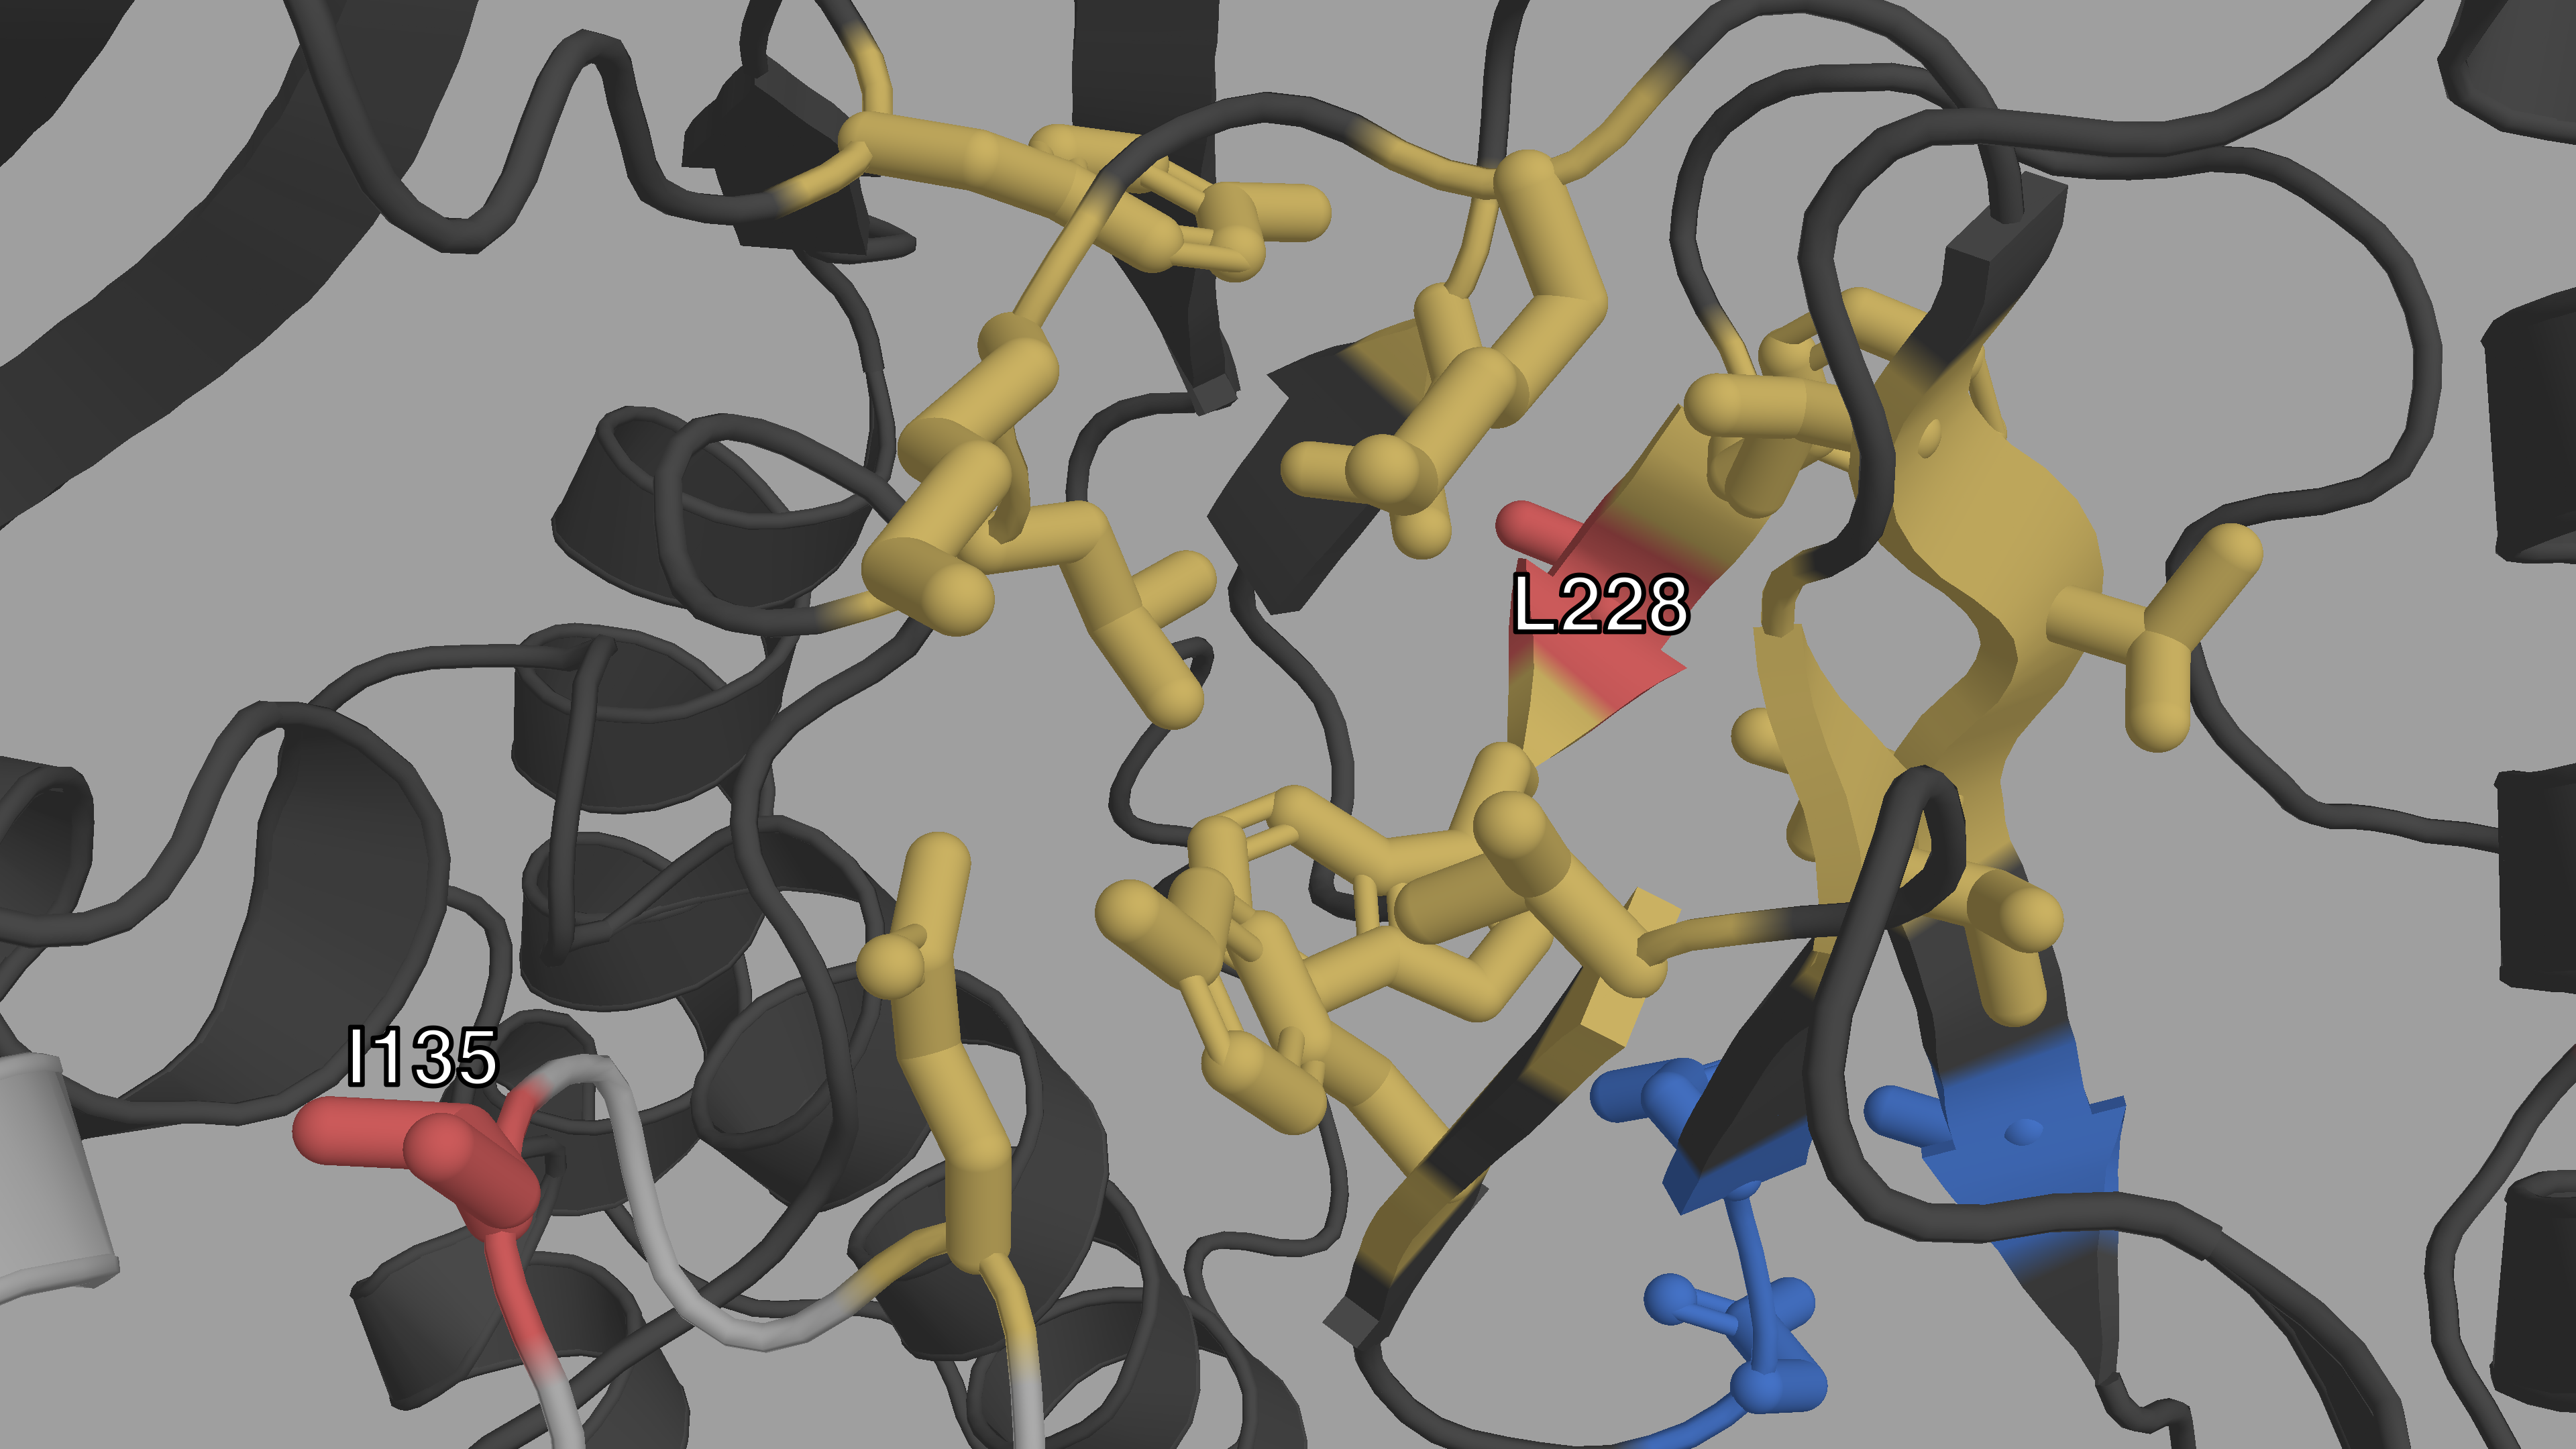 **Closeup structural view of the entrance of the NNIBP of HIV-1 RT**  
The p66 subunit is colored in dark gray, the p51 subunit in light gray. The
NNIBP is highlighted in yellow. The active site is colored in blue. We
can see the physical proximity of I135 (red) to the entrance of the
NNIBP. We can also see how L228 (red) is between 2 AAs of the NNIBP.